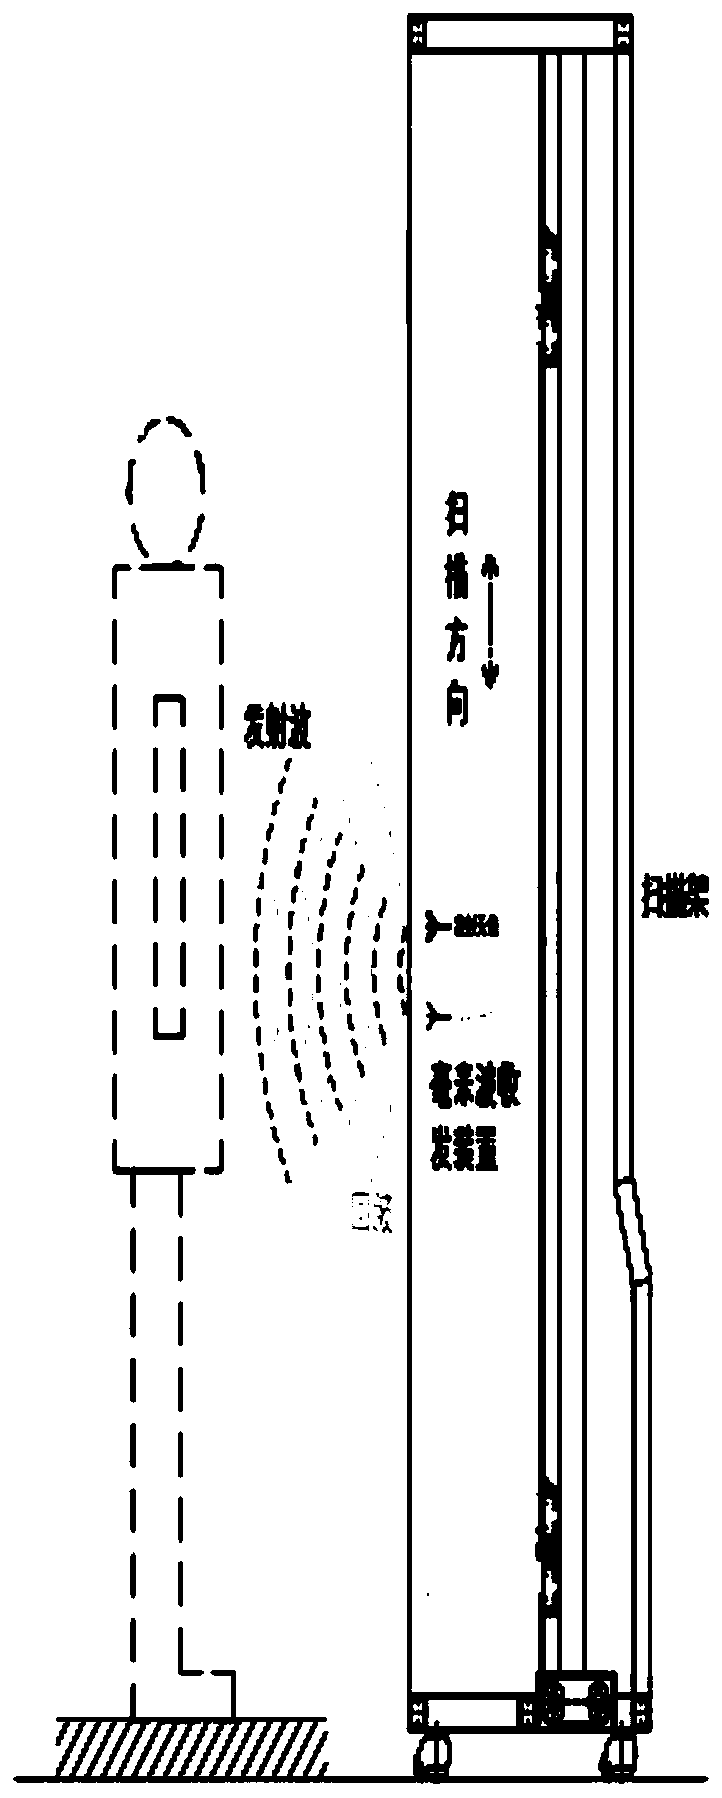 Millimeter wave image-based face recognition method and system